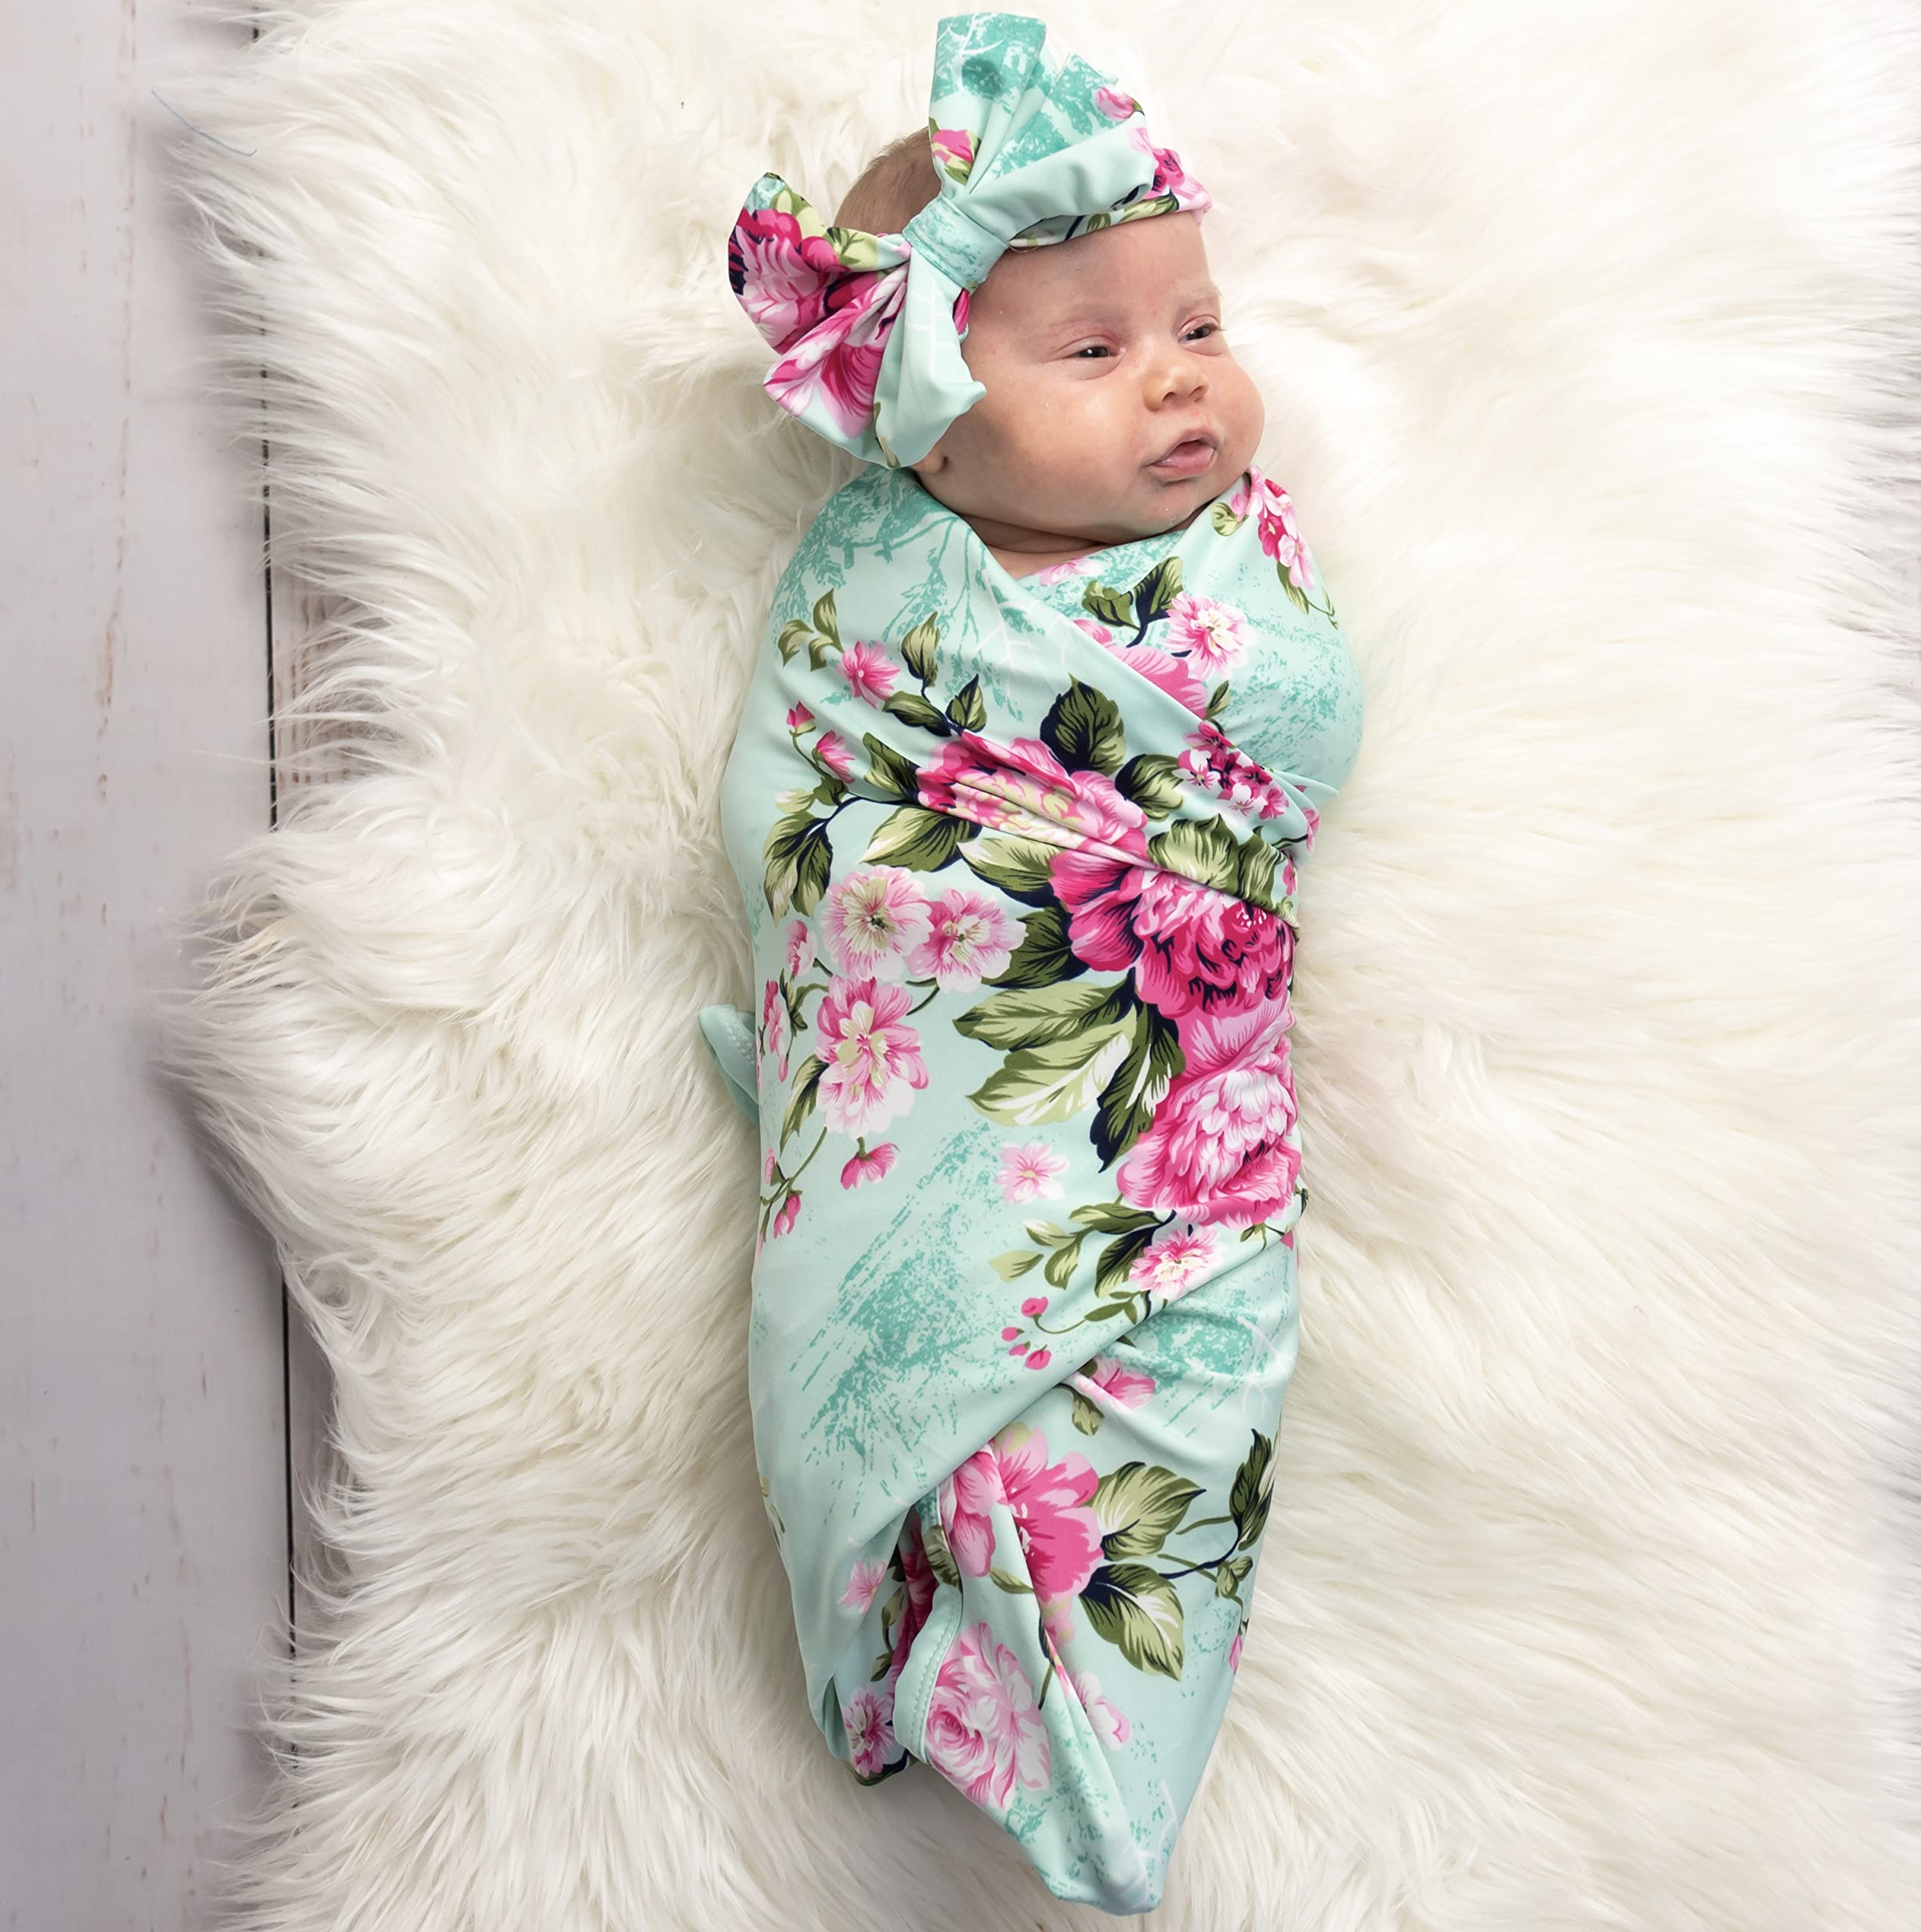 DOUBLE THE SPRINKLES Maternity Robe & Swaddle Set, Mom & Baby Me Outfits Matching, Hospital Gown, Blanket & Hat.